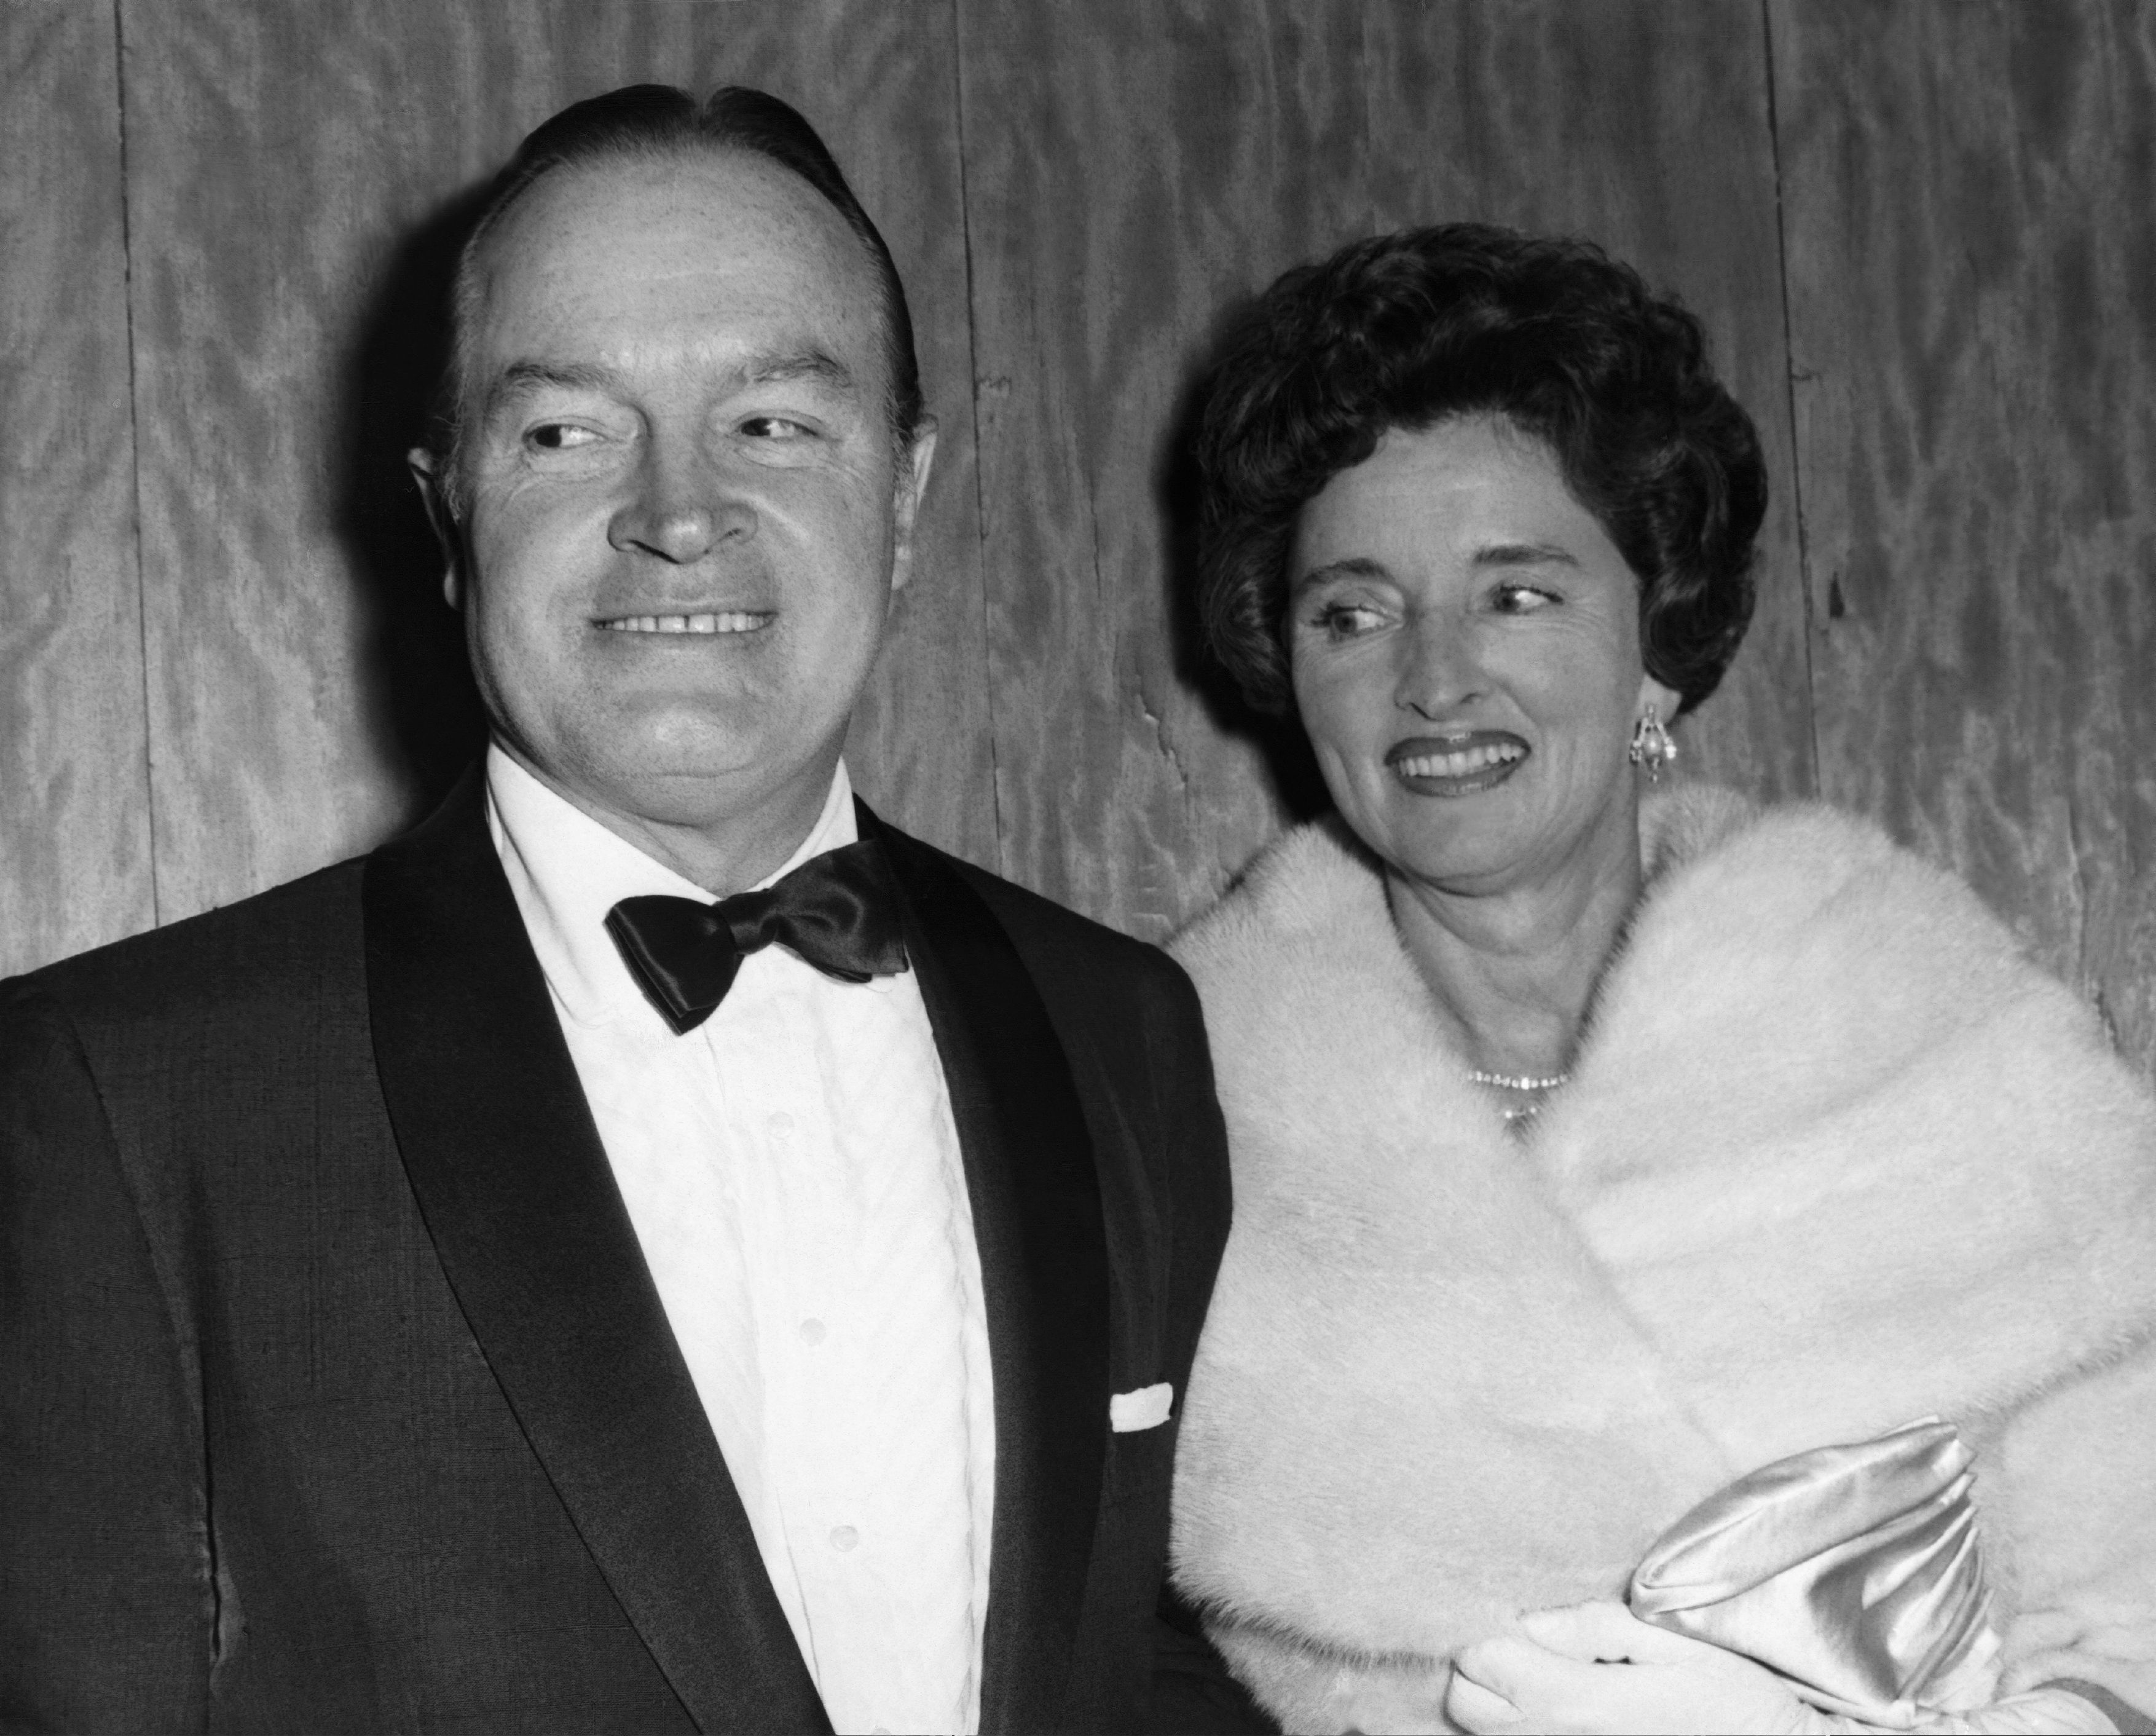 Bob Hope and Dolores Hope at the Warner Theatre in London on September 15, 1961 | Source: Getty Images